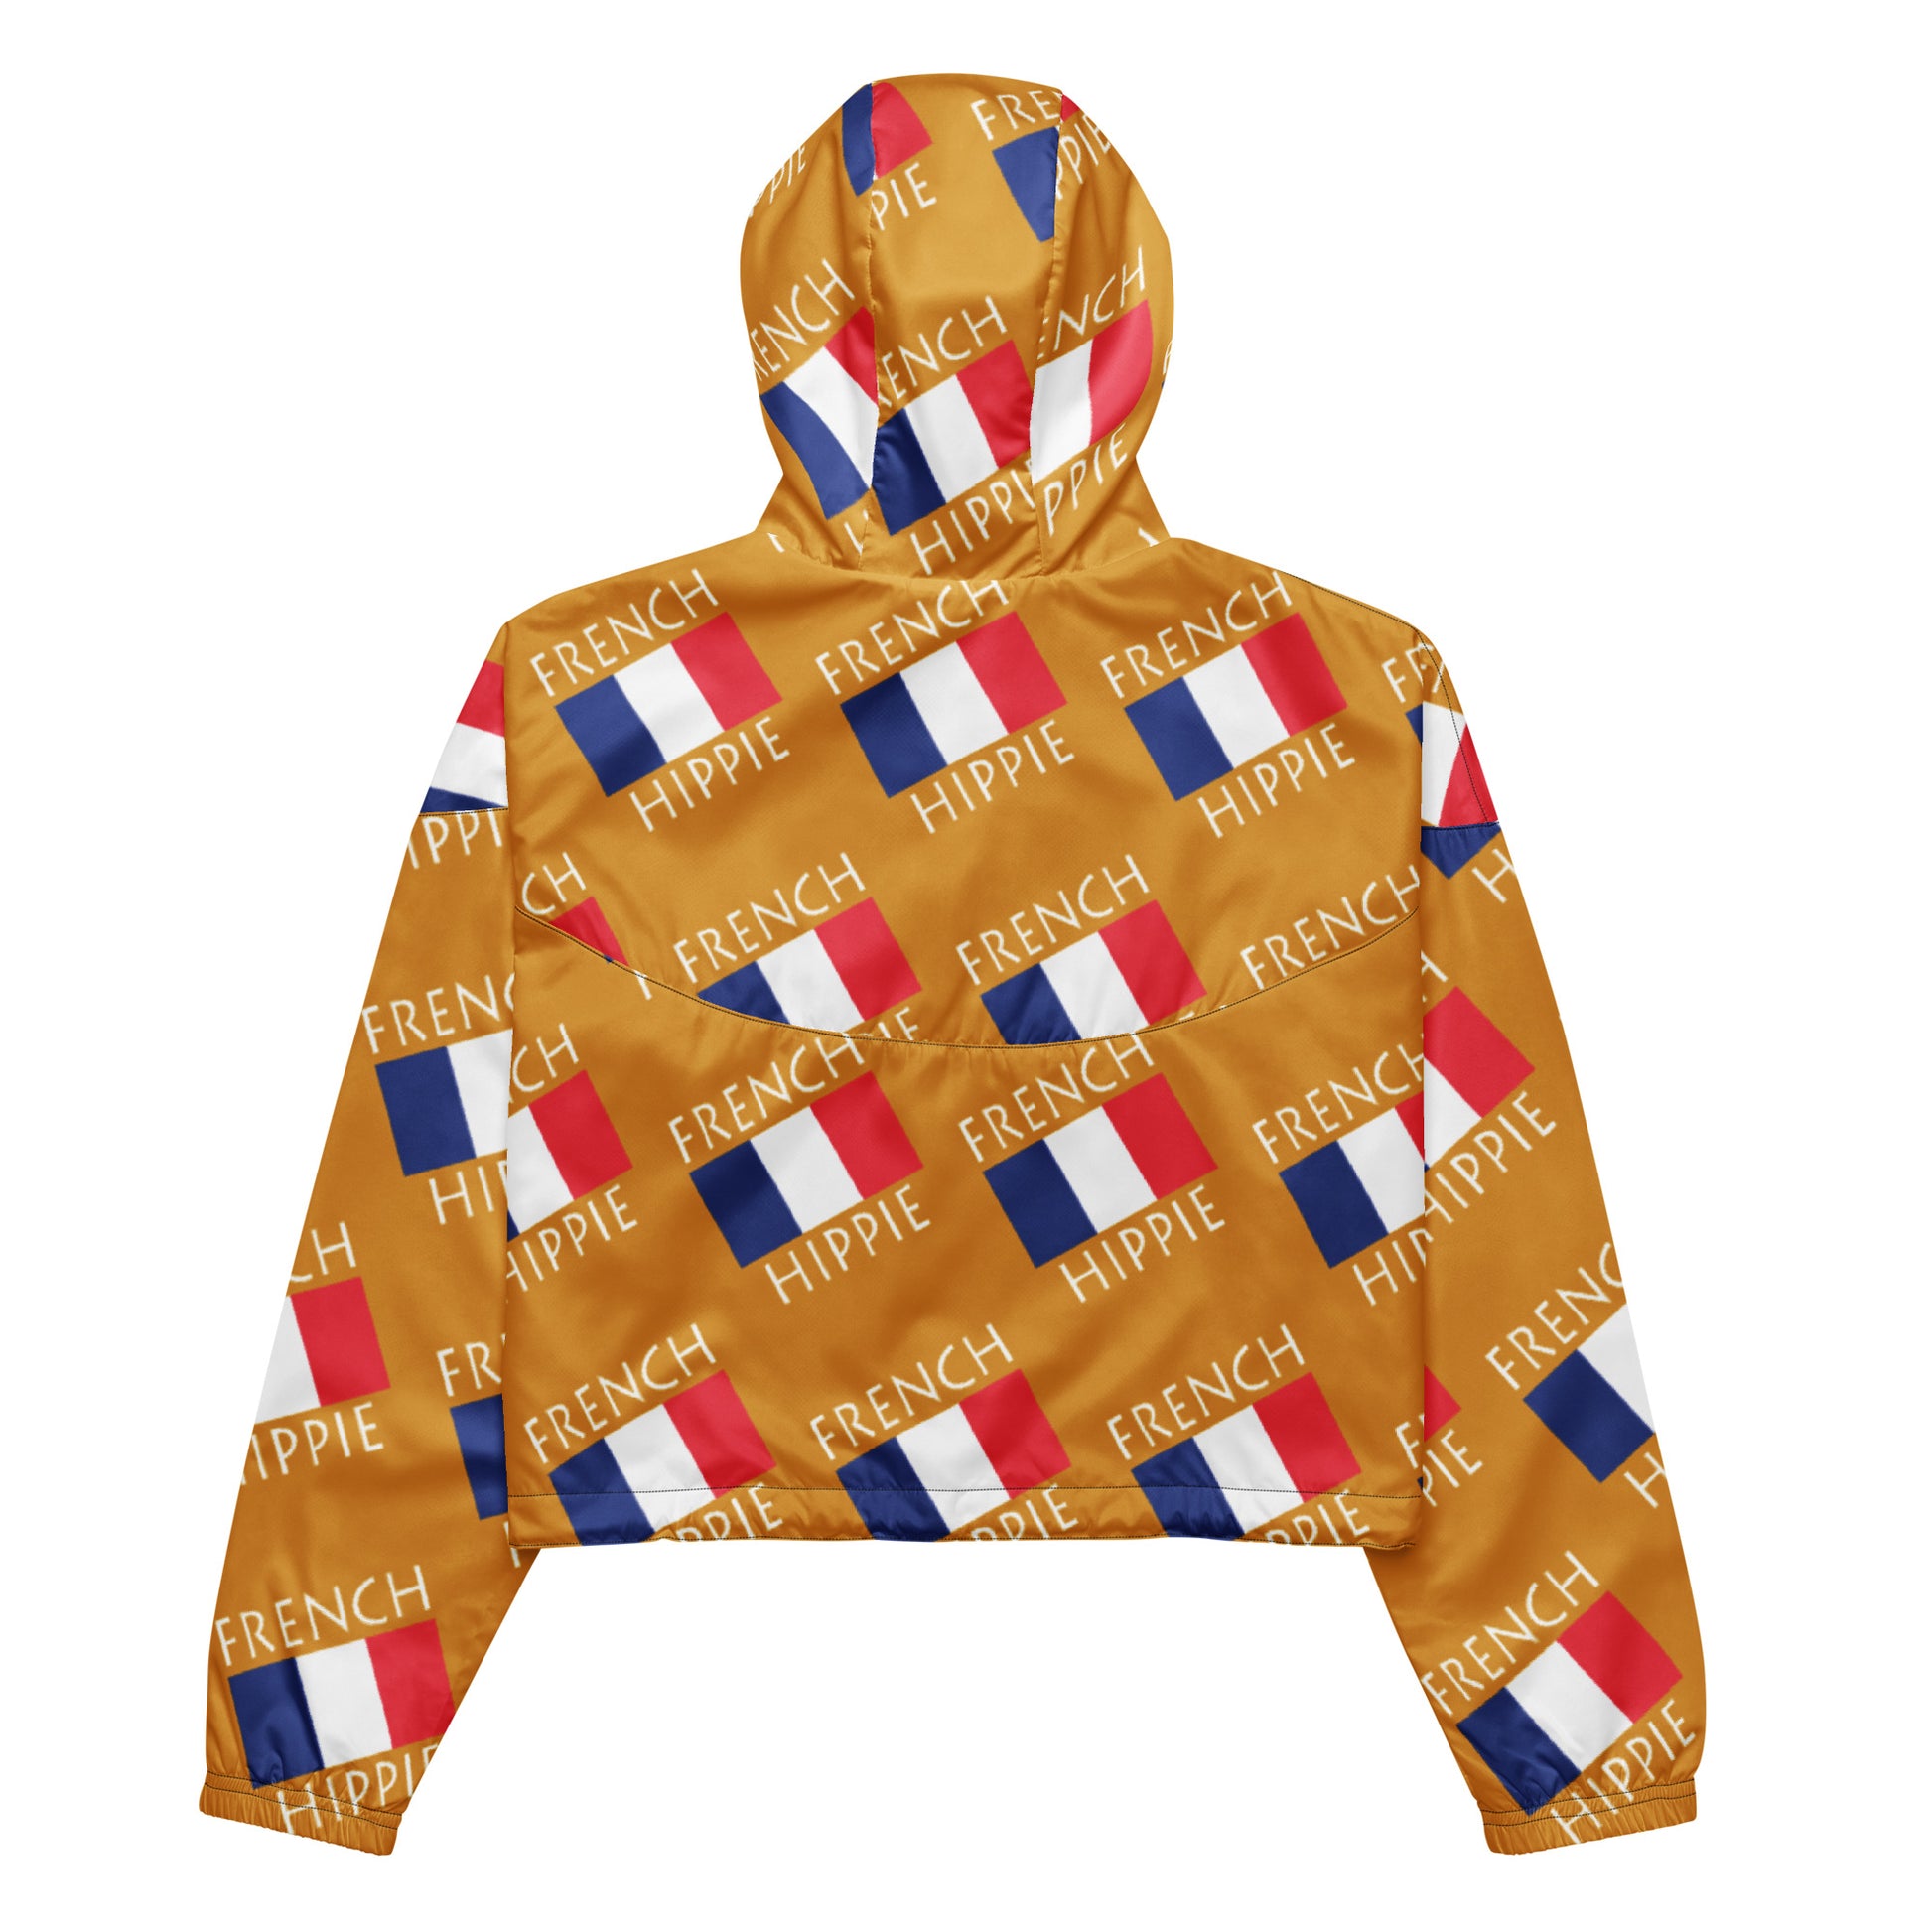 Your French Flag Hippie Stylish cropped windbreaker half-zip jacket is a fashion statement! Hiking or hanging out it is super functional while making you look beautiful. Features include side-slit pockets, breathable mesh lining, and adjustable draw cords on the hood and waist to support all your stylish outdoor looks.